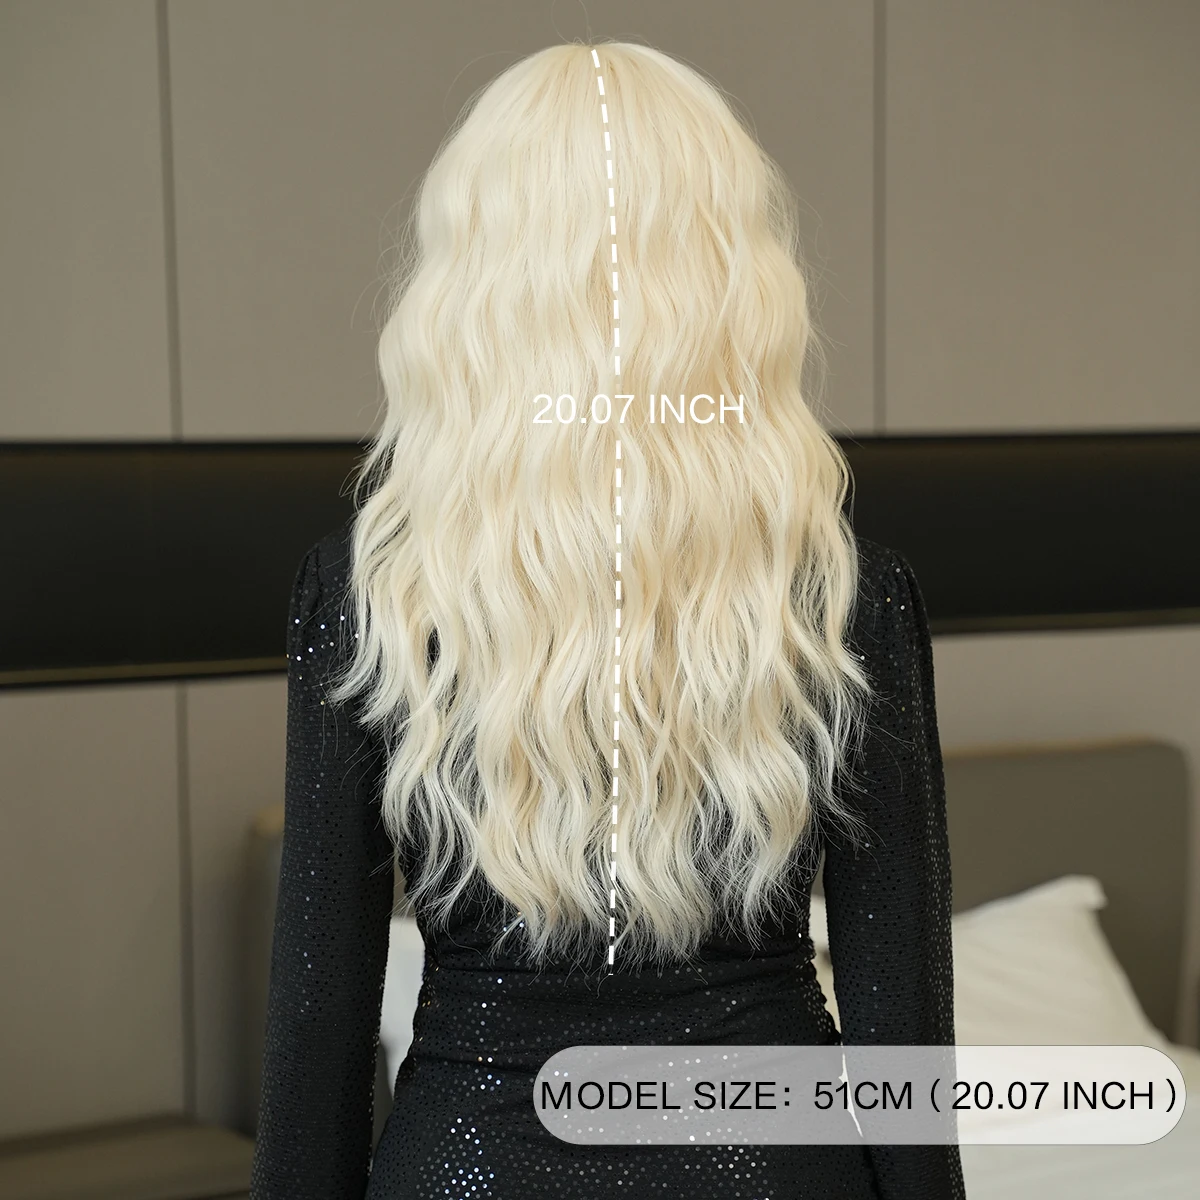 7JHH WIGS Synthetic Water Wave White Blonde Wig for Women Daily Party High Density Long Loose Wavy Hair Wigs with Neat Bangs